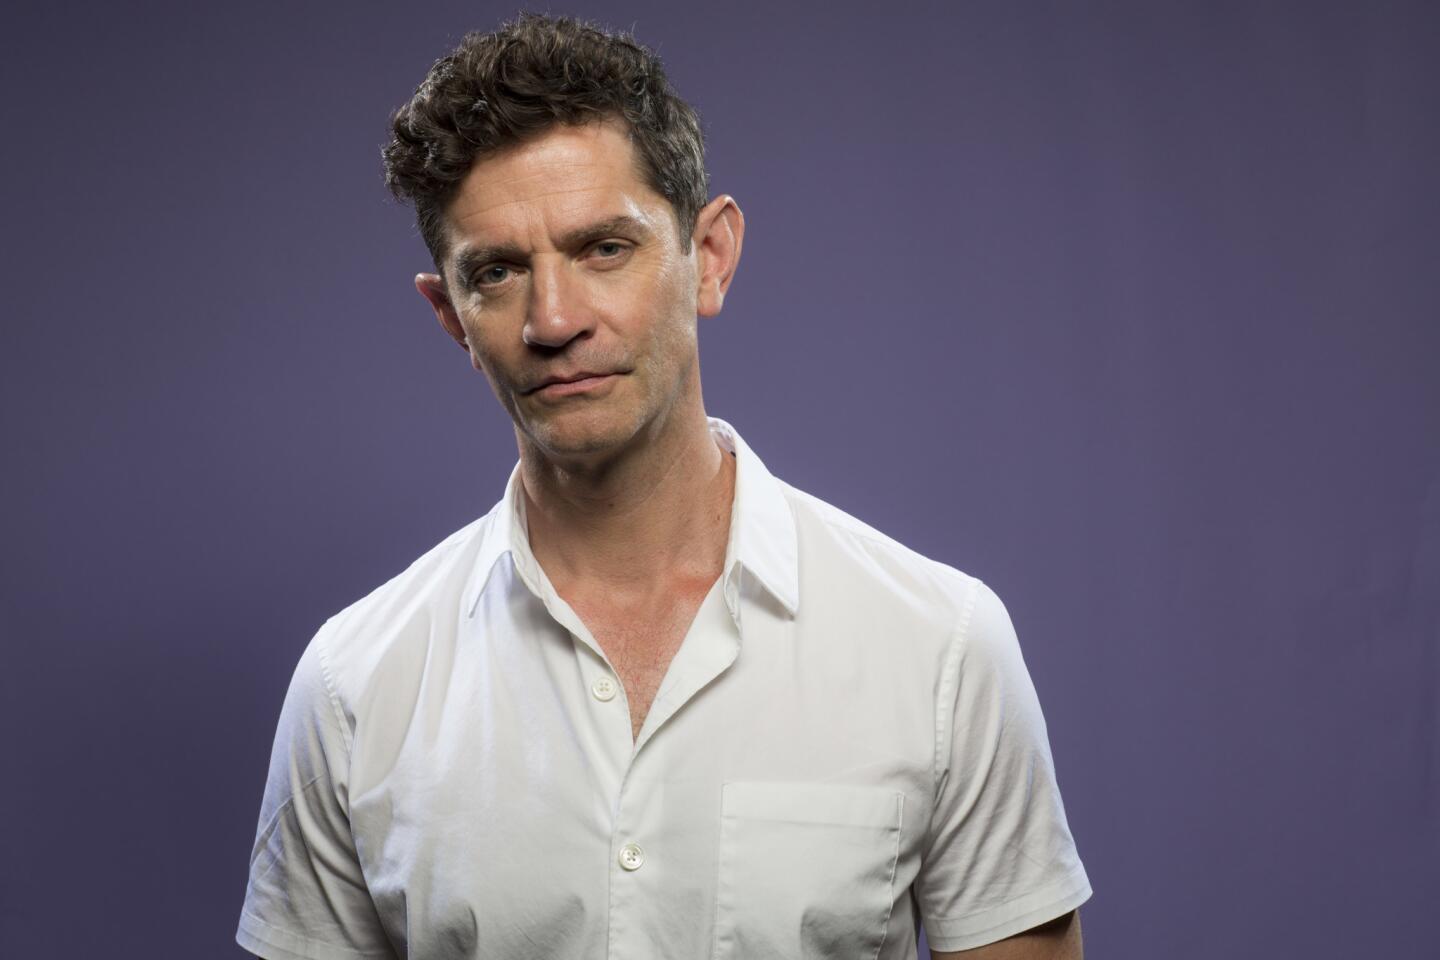 James Frain, from the television series "Star Trek Discovery," photographed in the L.A. Times photo